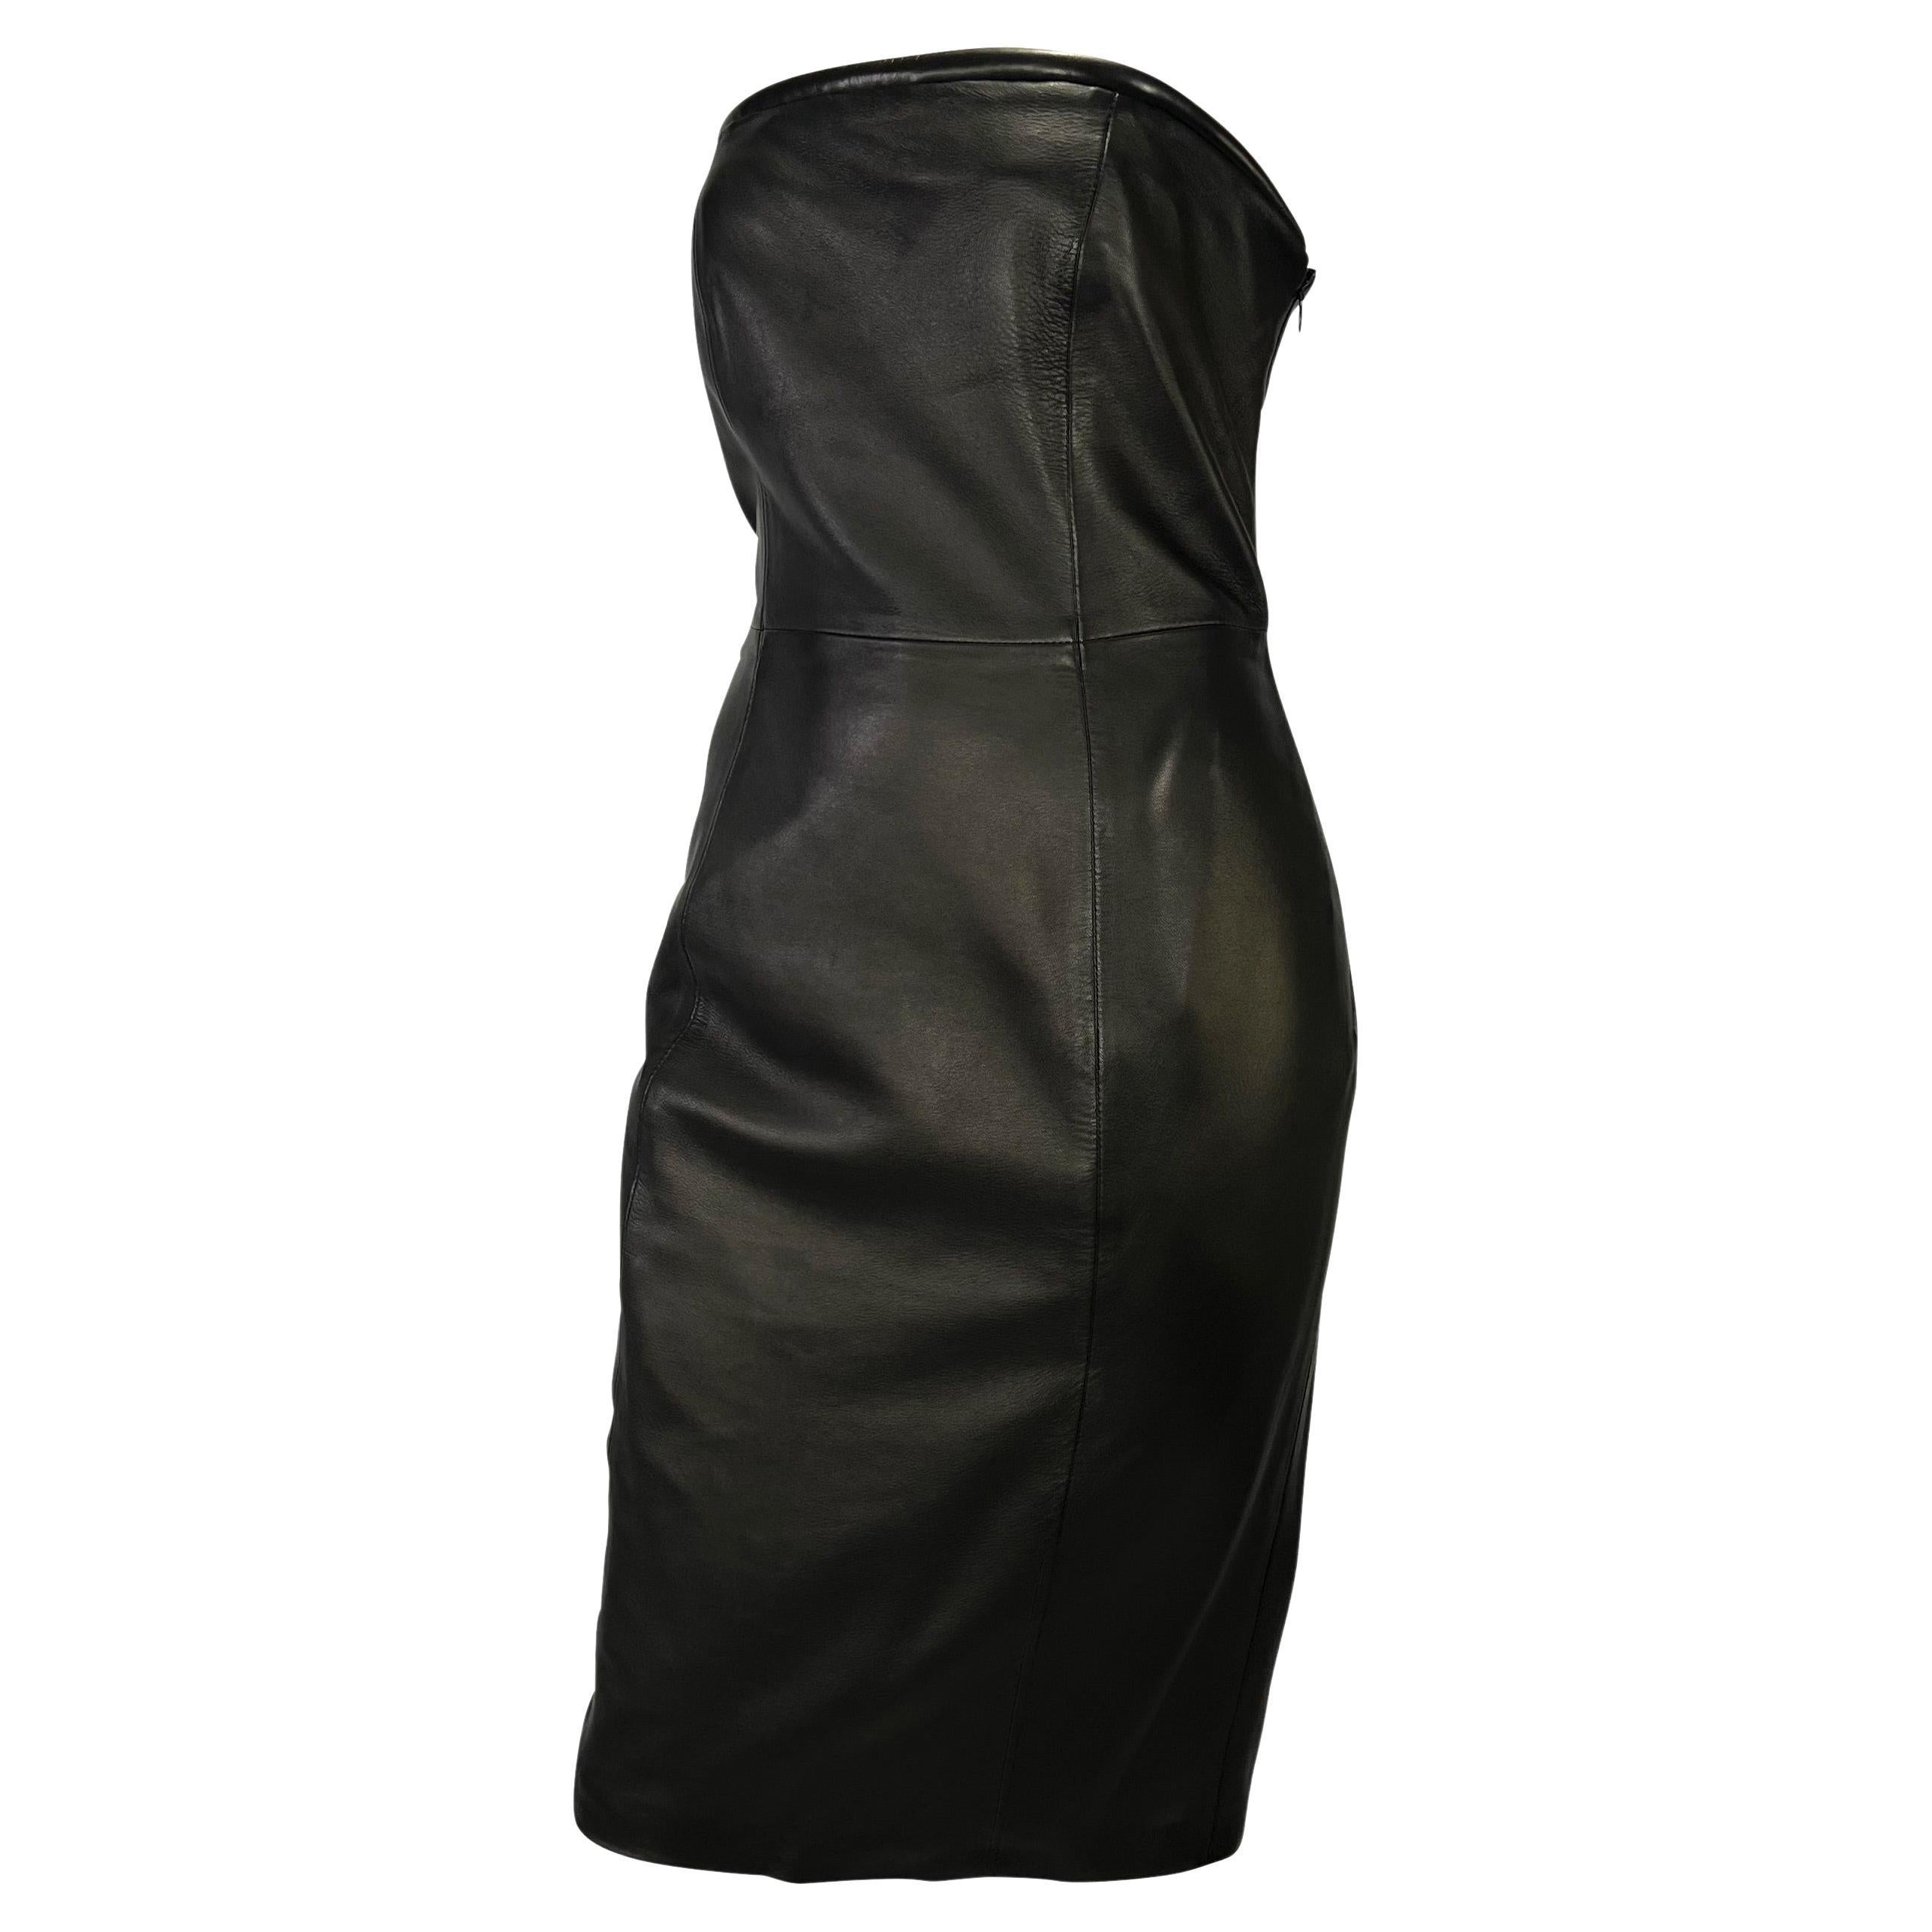 F/W 1997 Gianni Versace Padded Neckline Black Leather Bodycon Tube Dress For Sale